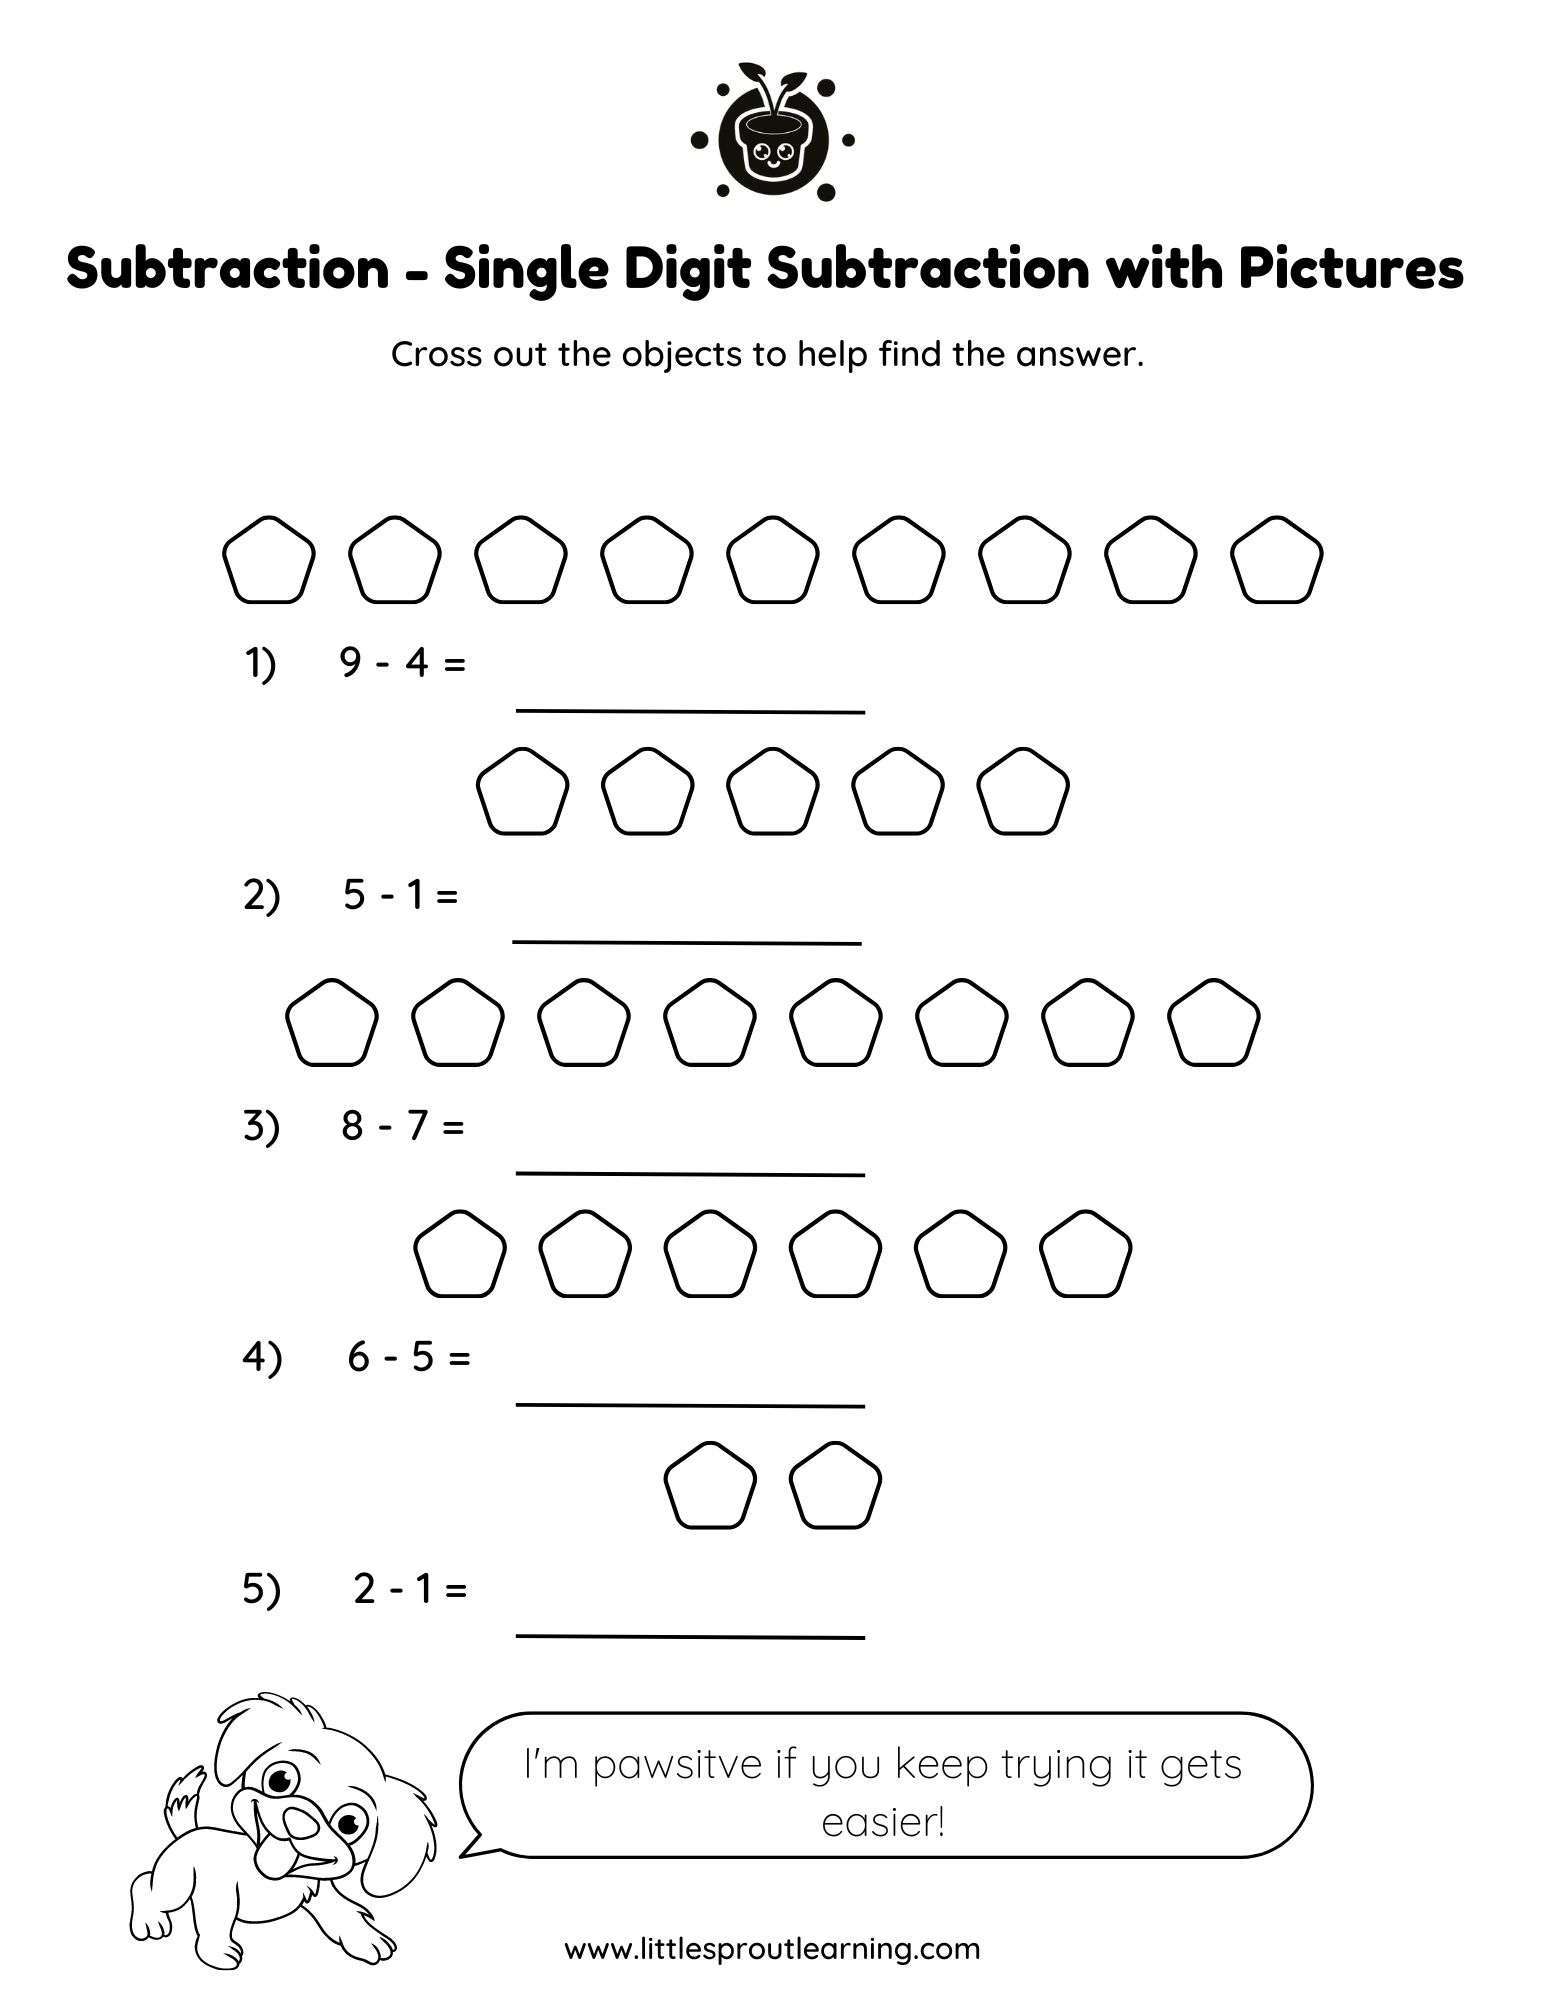 Subtraction Using Objects – Single Digit